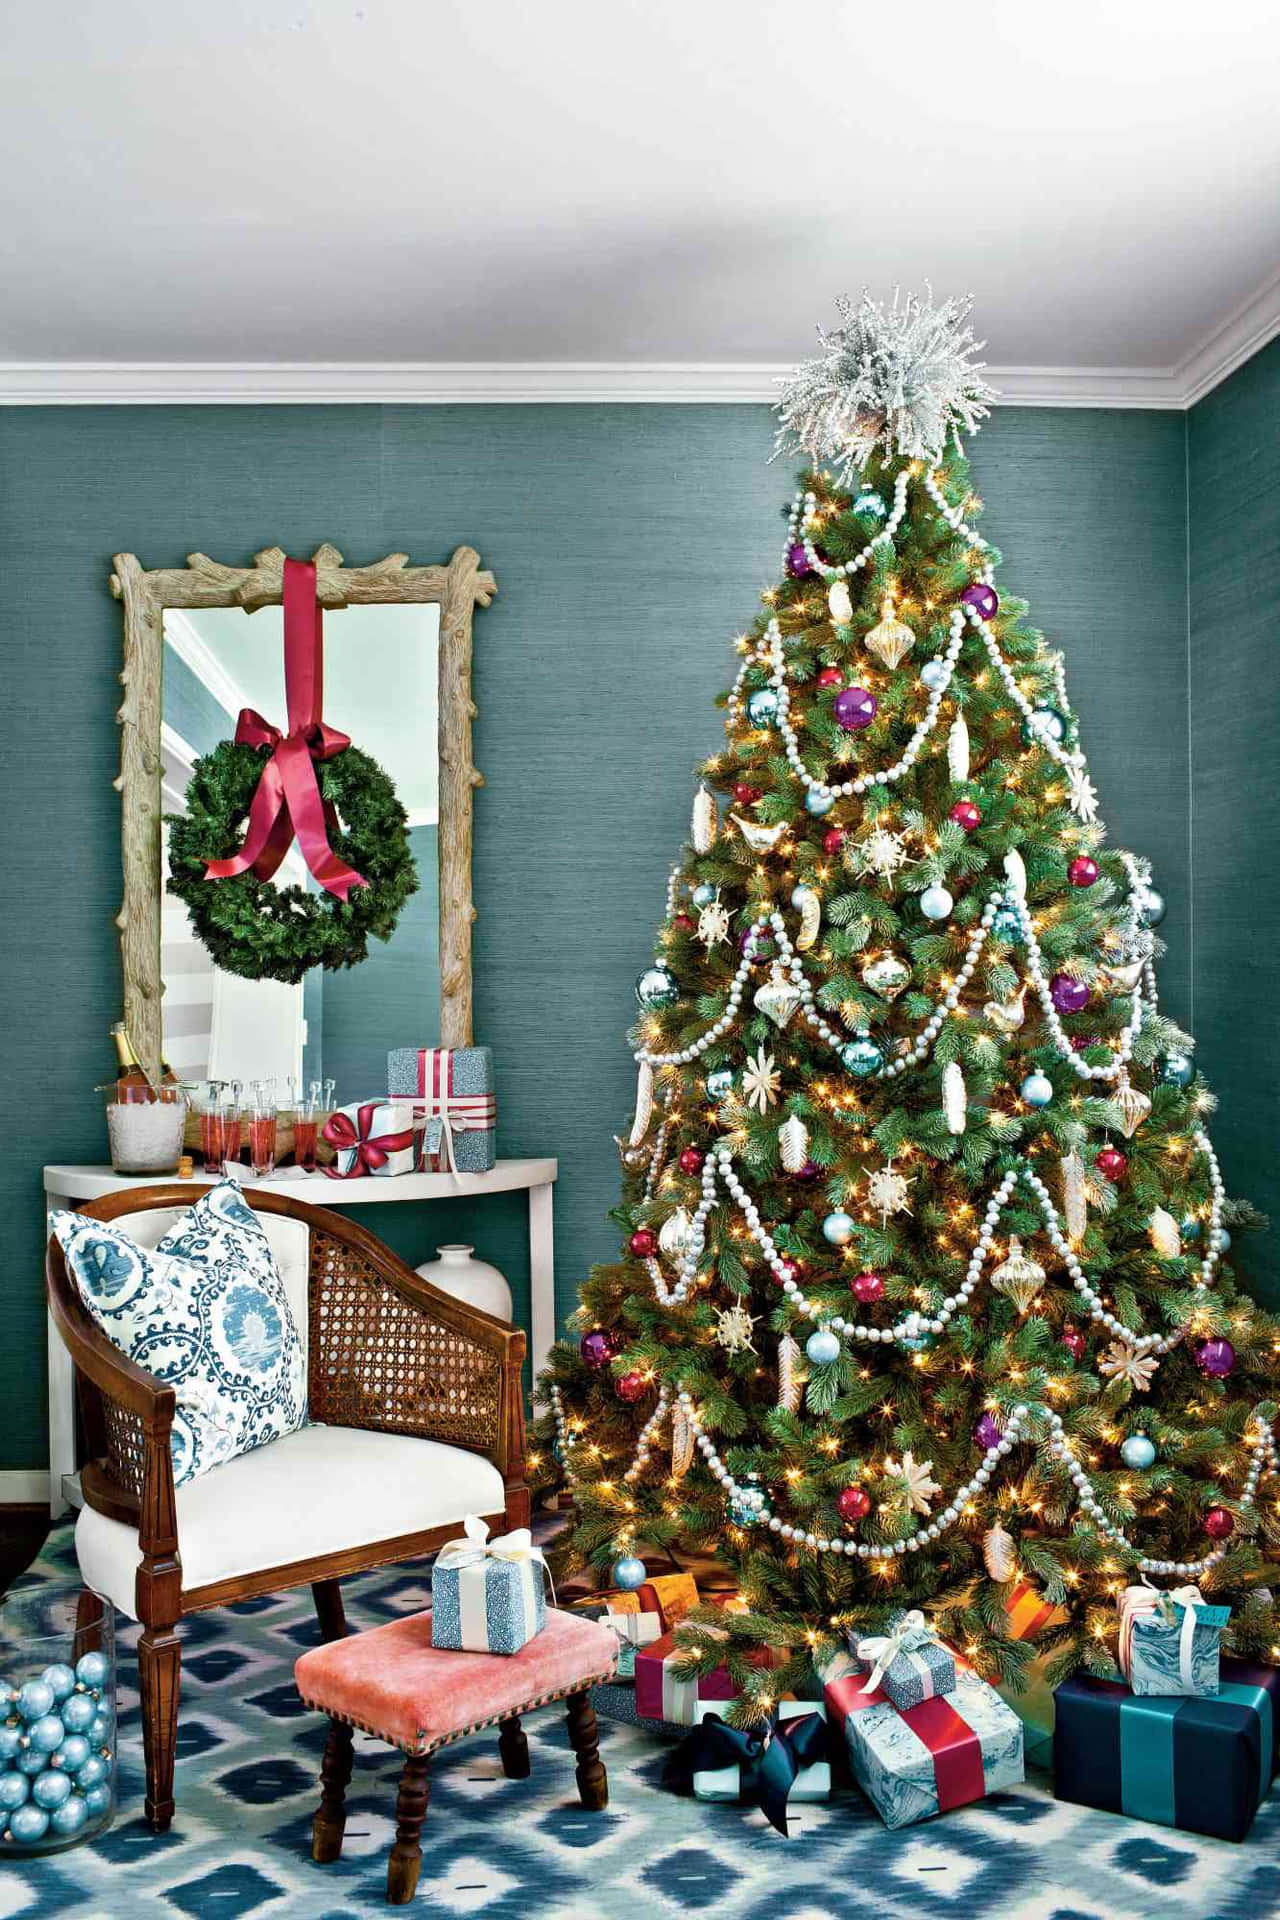 A Christmas Tree In A Room With Blue And White Decorations